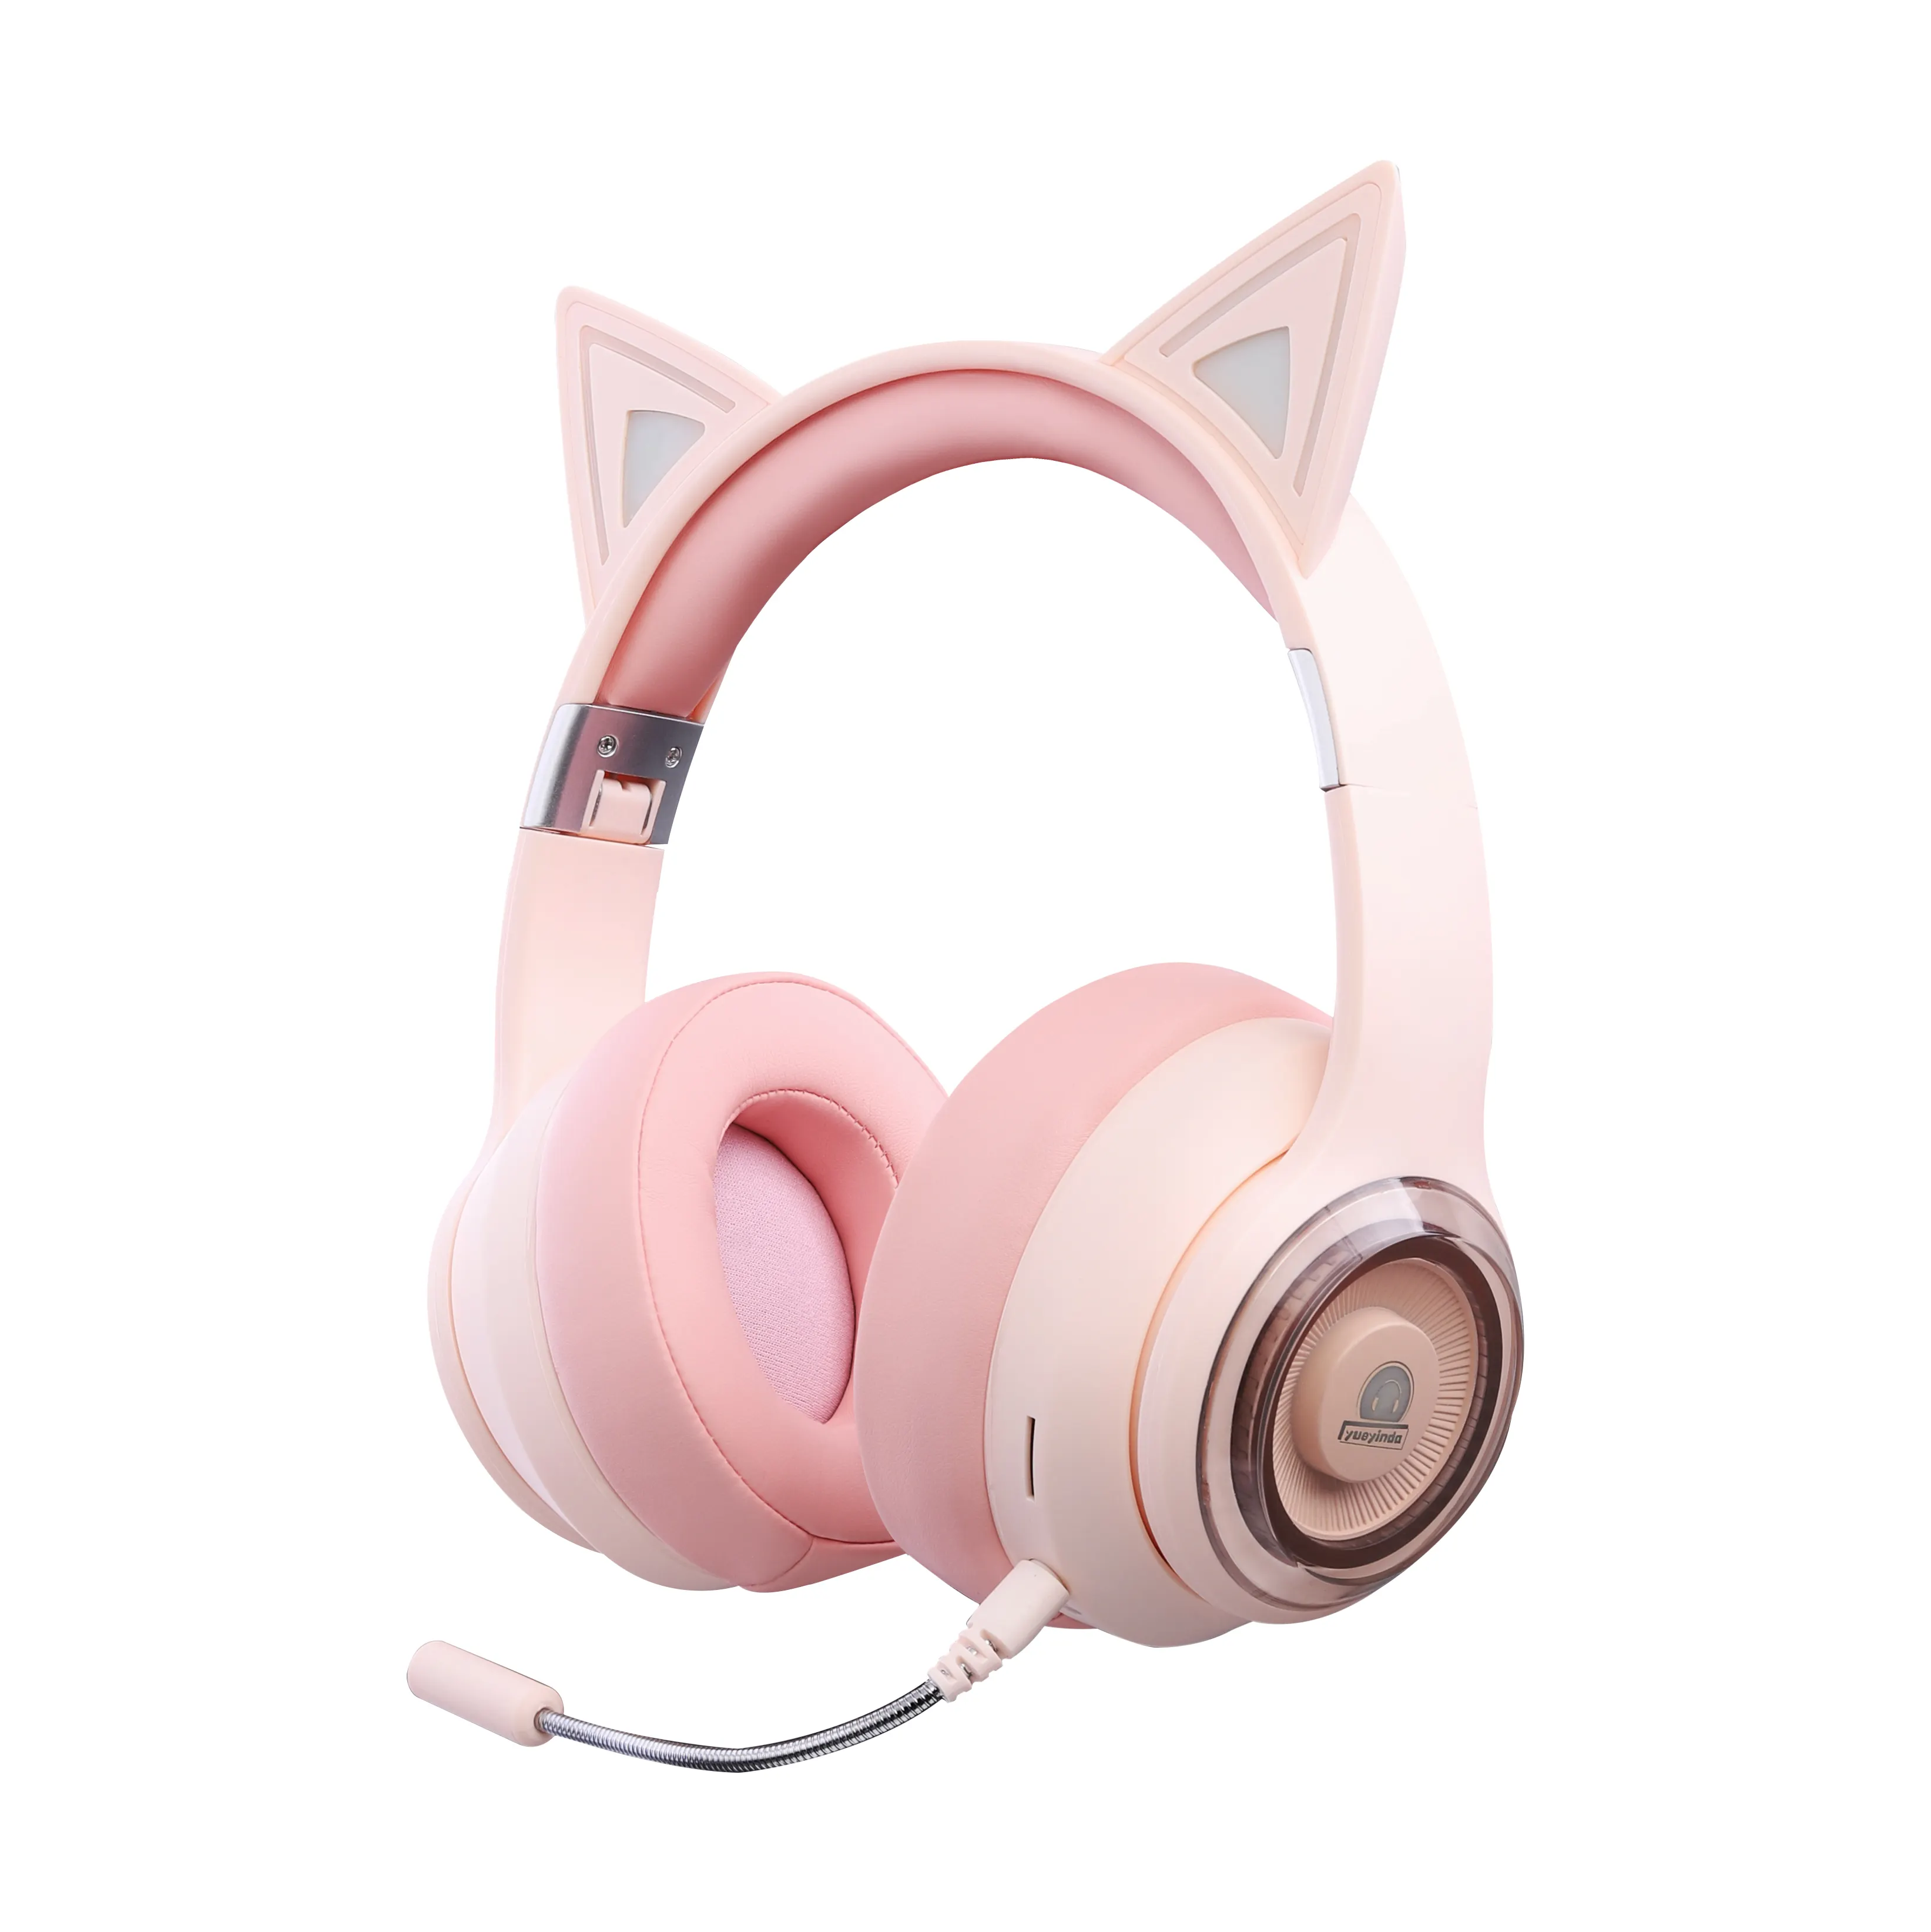 Hot sale fashionable BT 5.3 gaming cat ear headset wireless led earphones over-ear headphone with mic